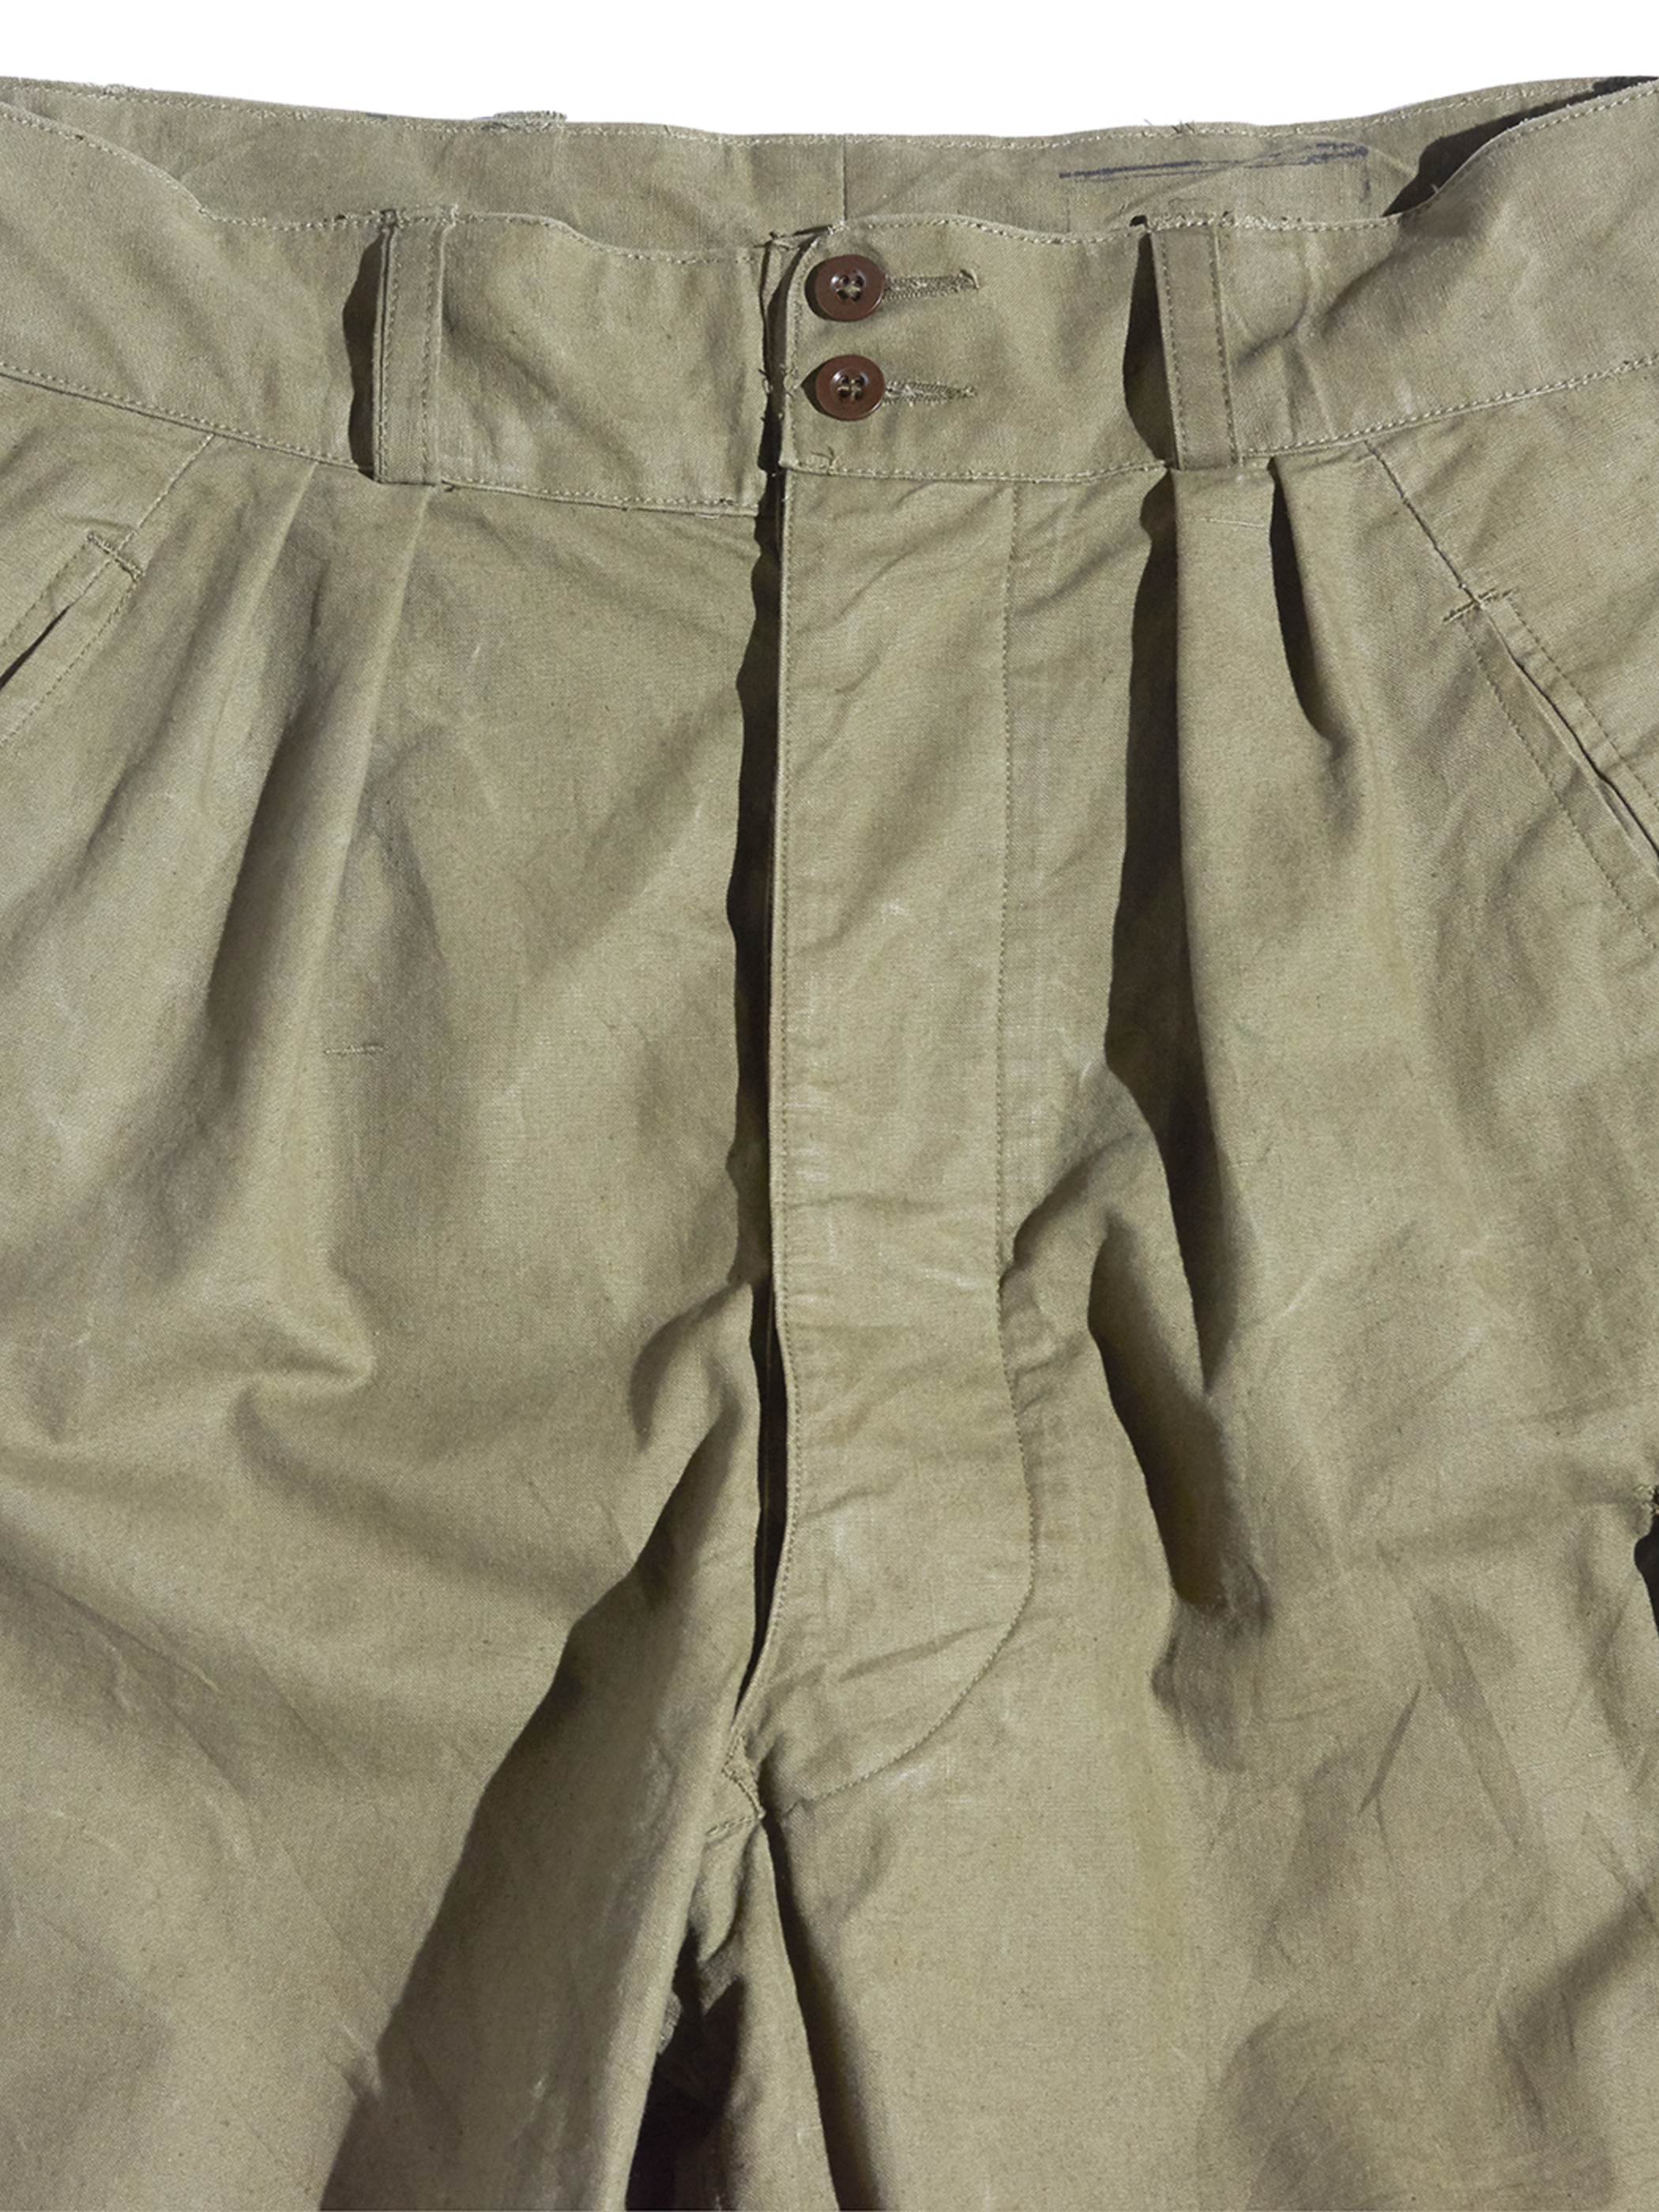 1950s "FRENCH ARMY" custom tuck M-47 field pants -OLIVE-